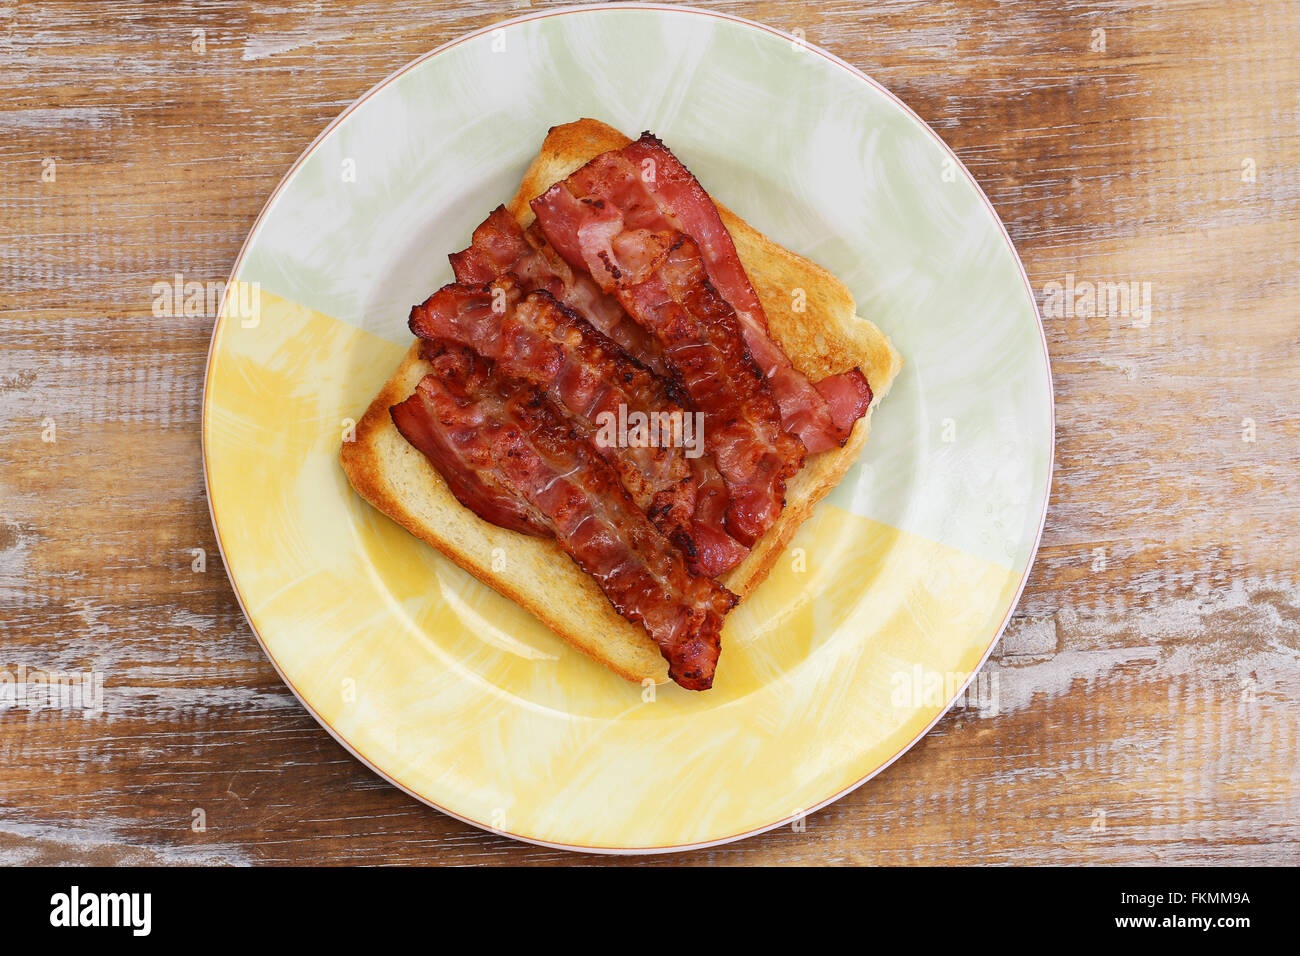 Toast with crispy bacon on plate on rustic wooden surface Stock Photo